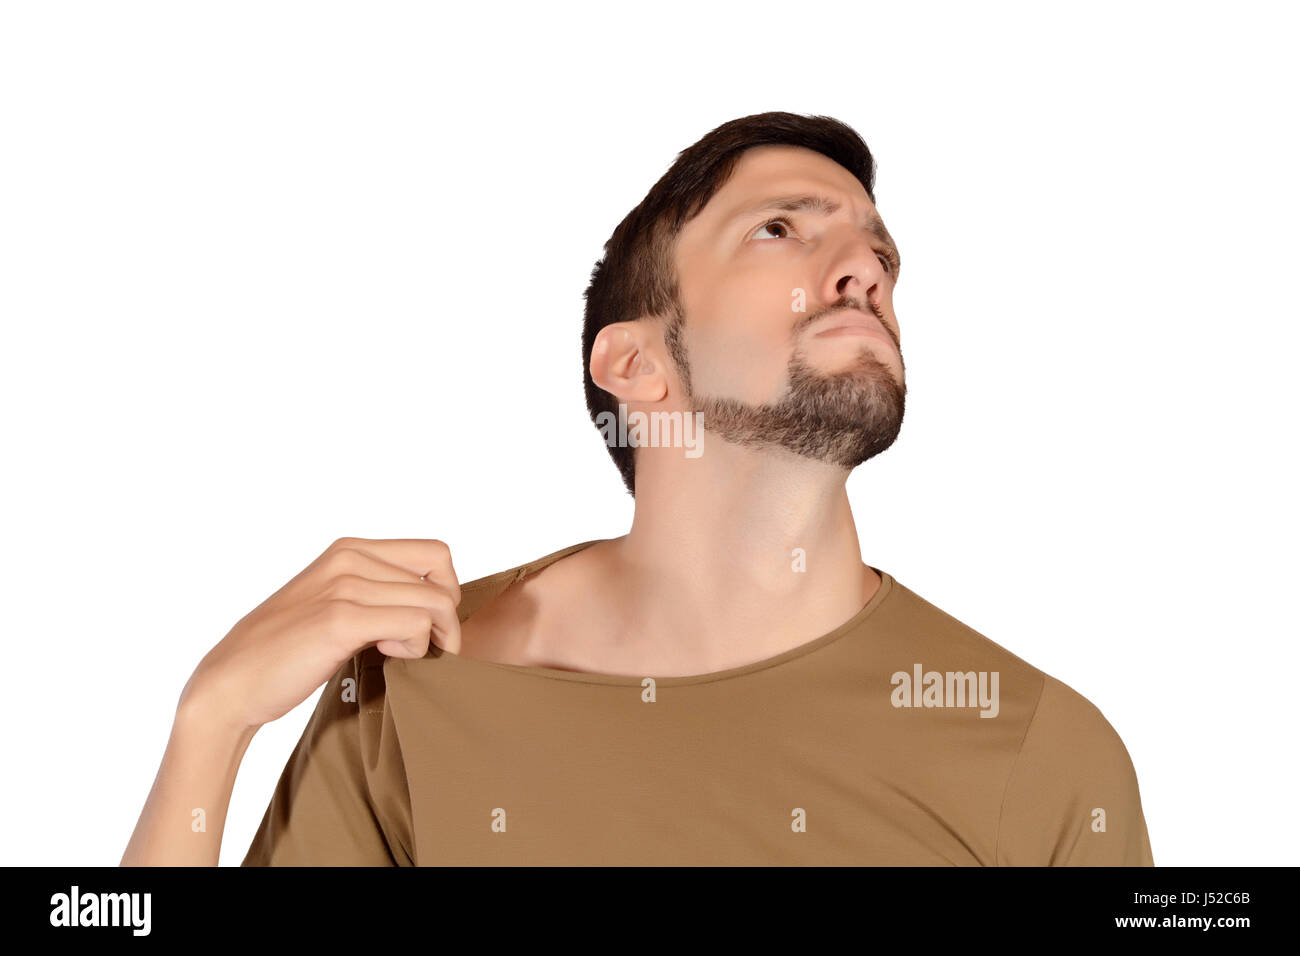 Portrait of young man smelling his armpit. Isolated white background. Stock Photo